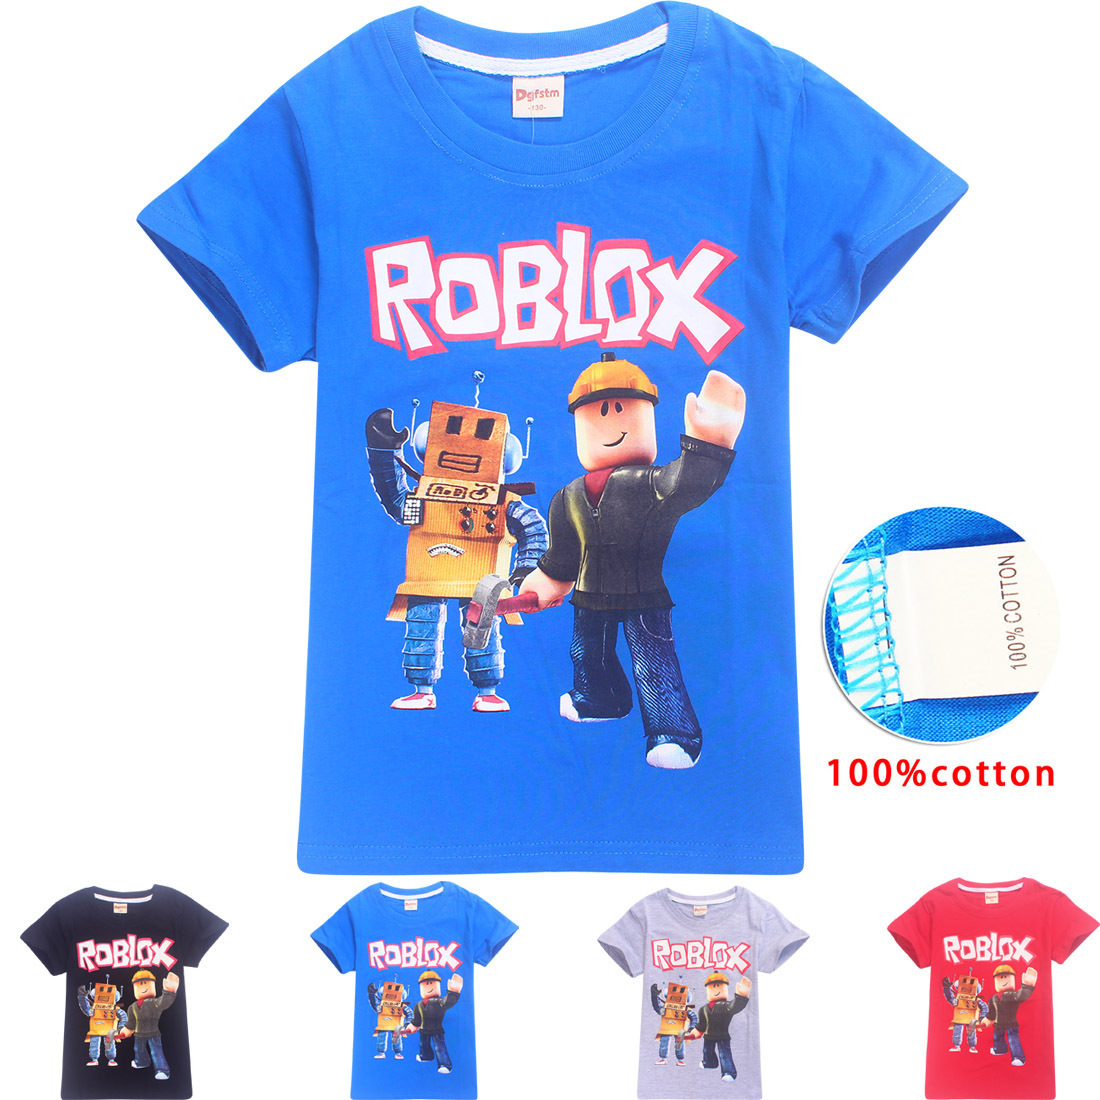 recently shared 50 awesome roblox fan outfits ideas 50